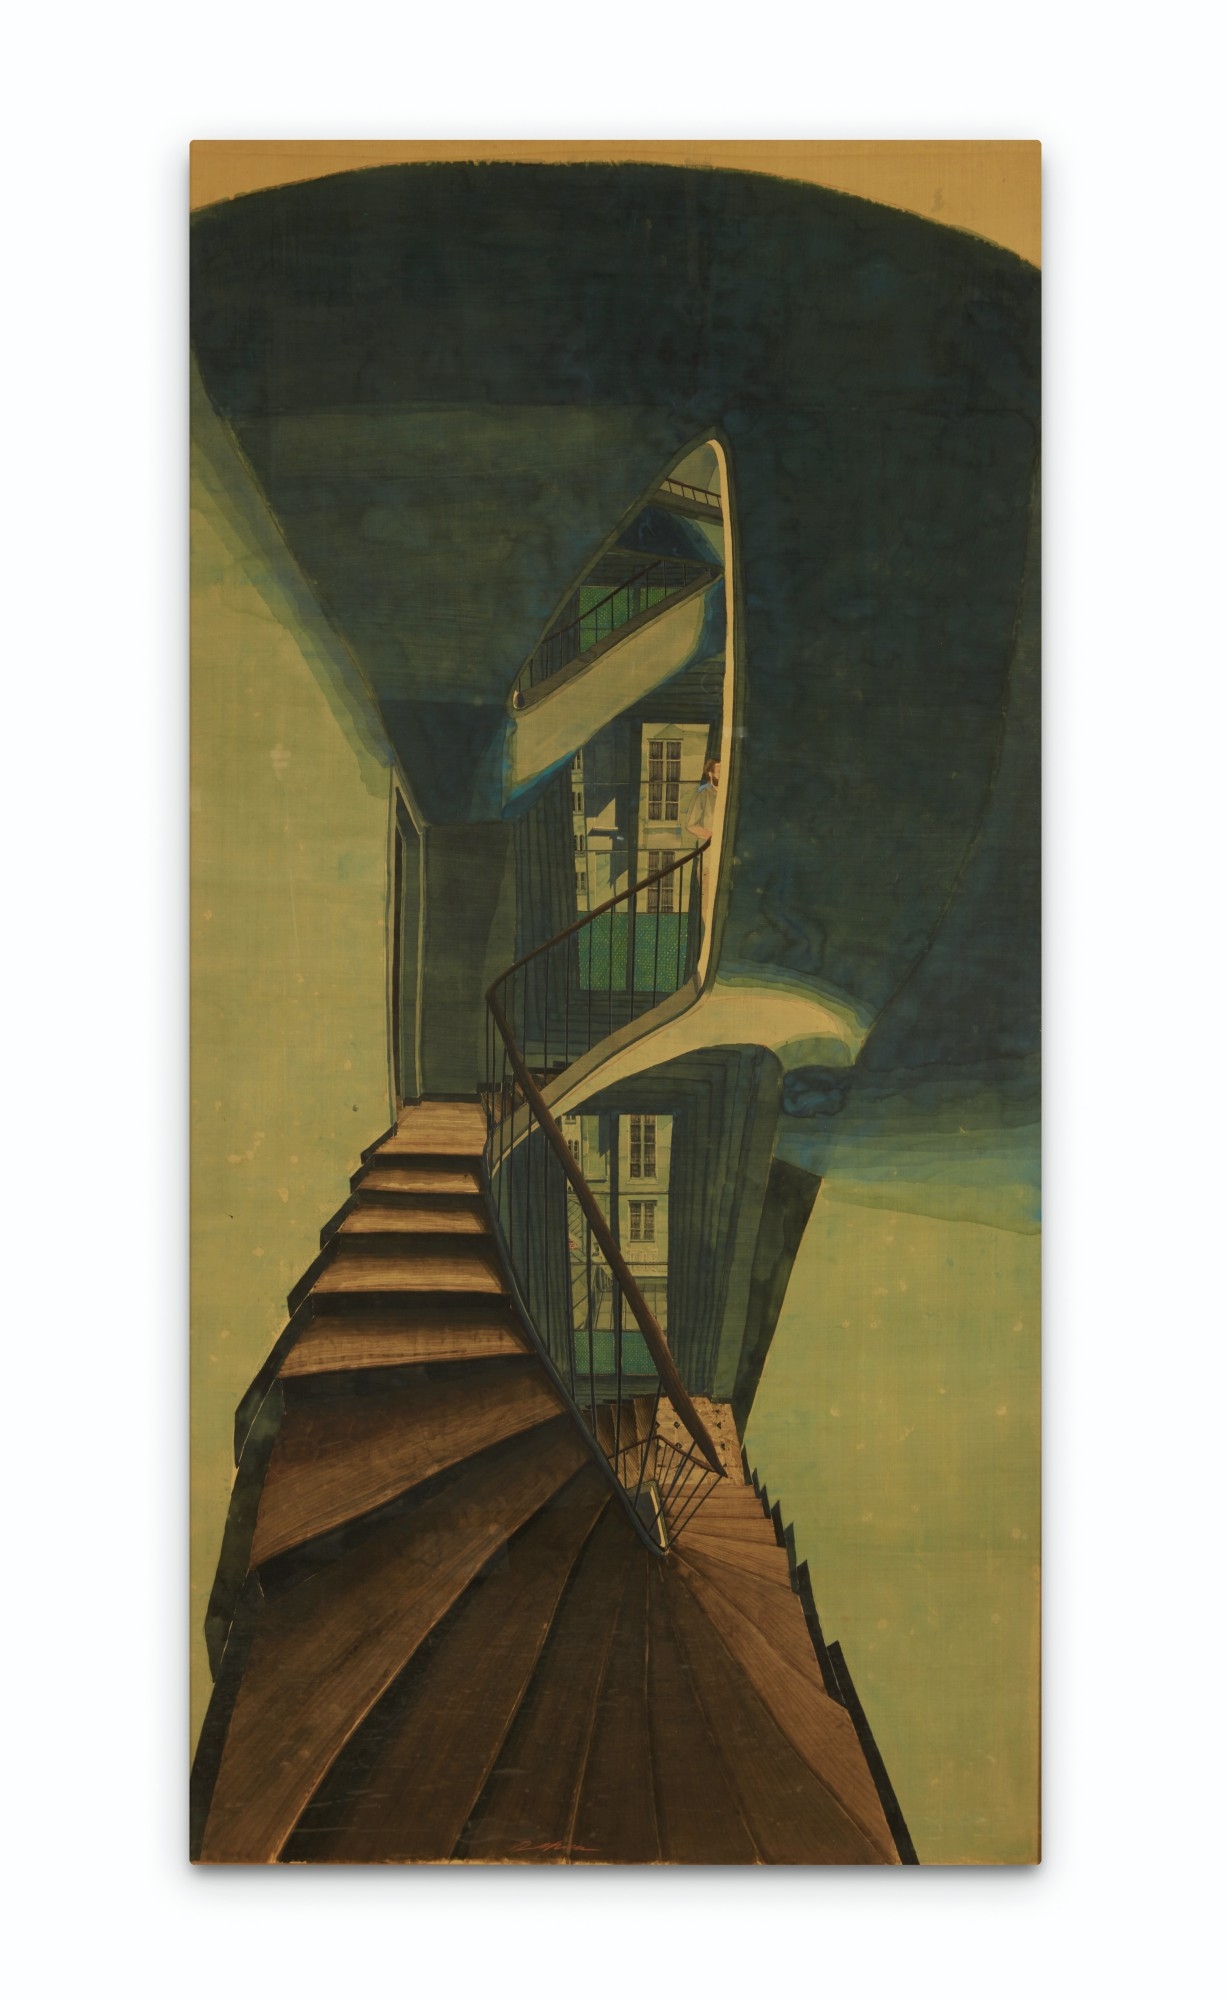 Escalier by Sam Szafran, Executed in 1992